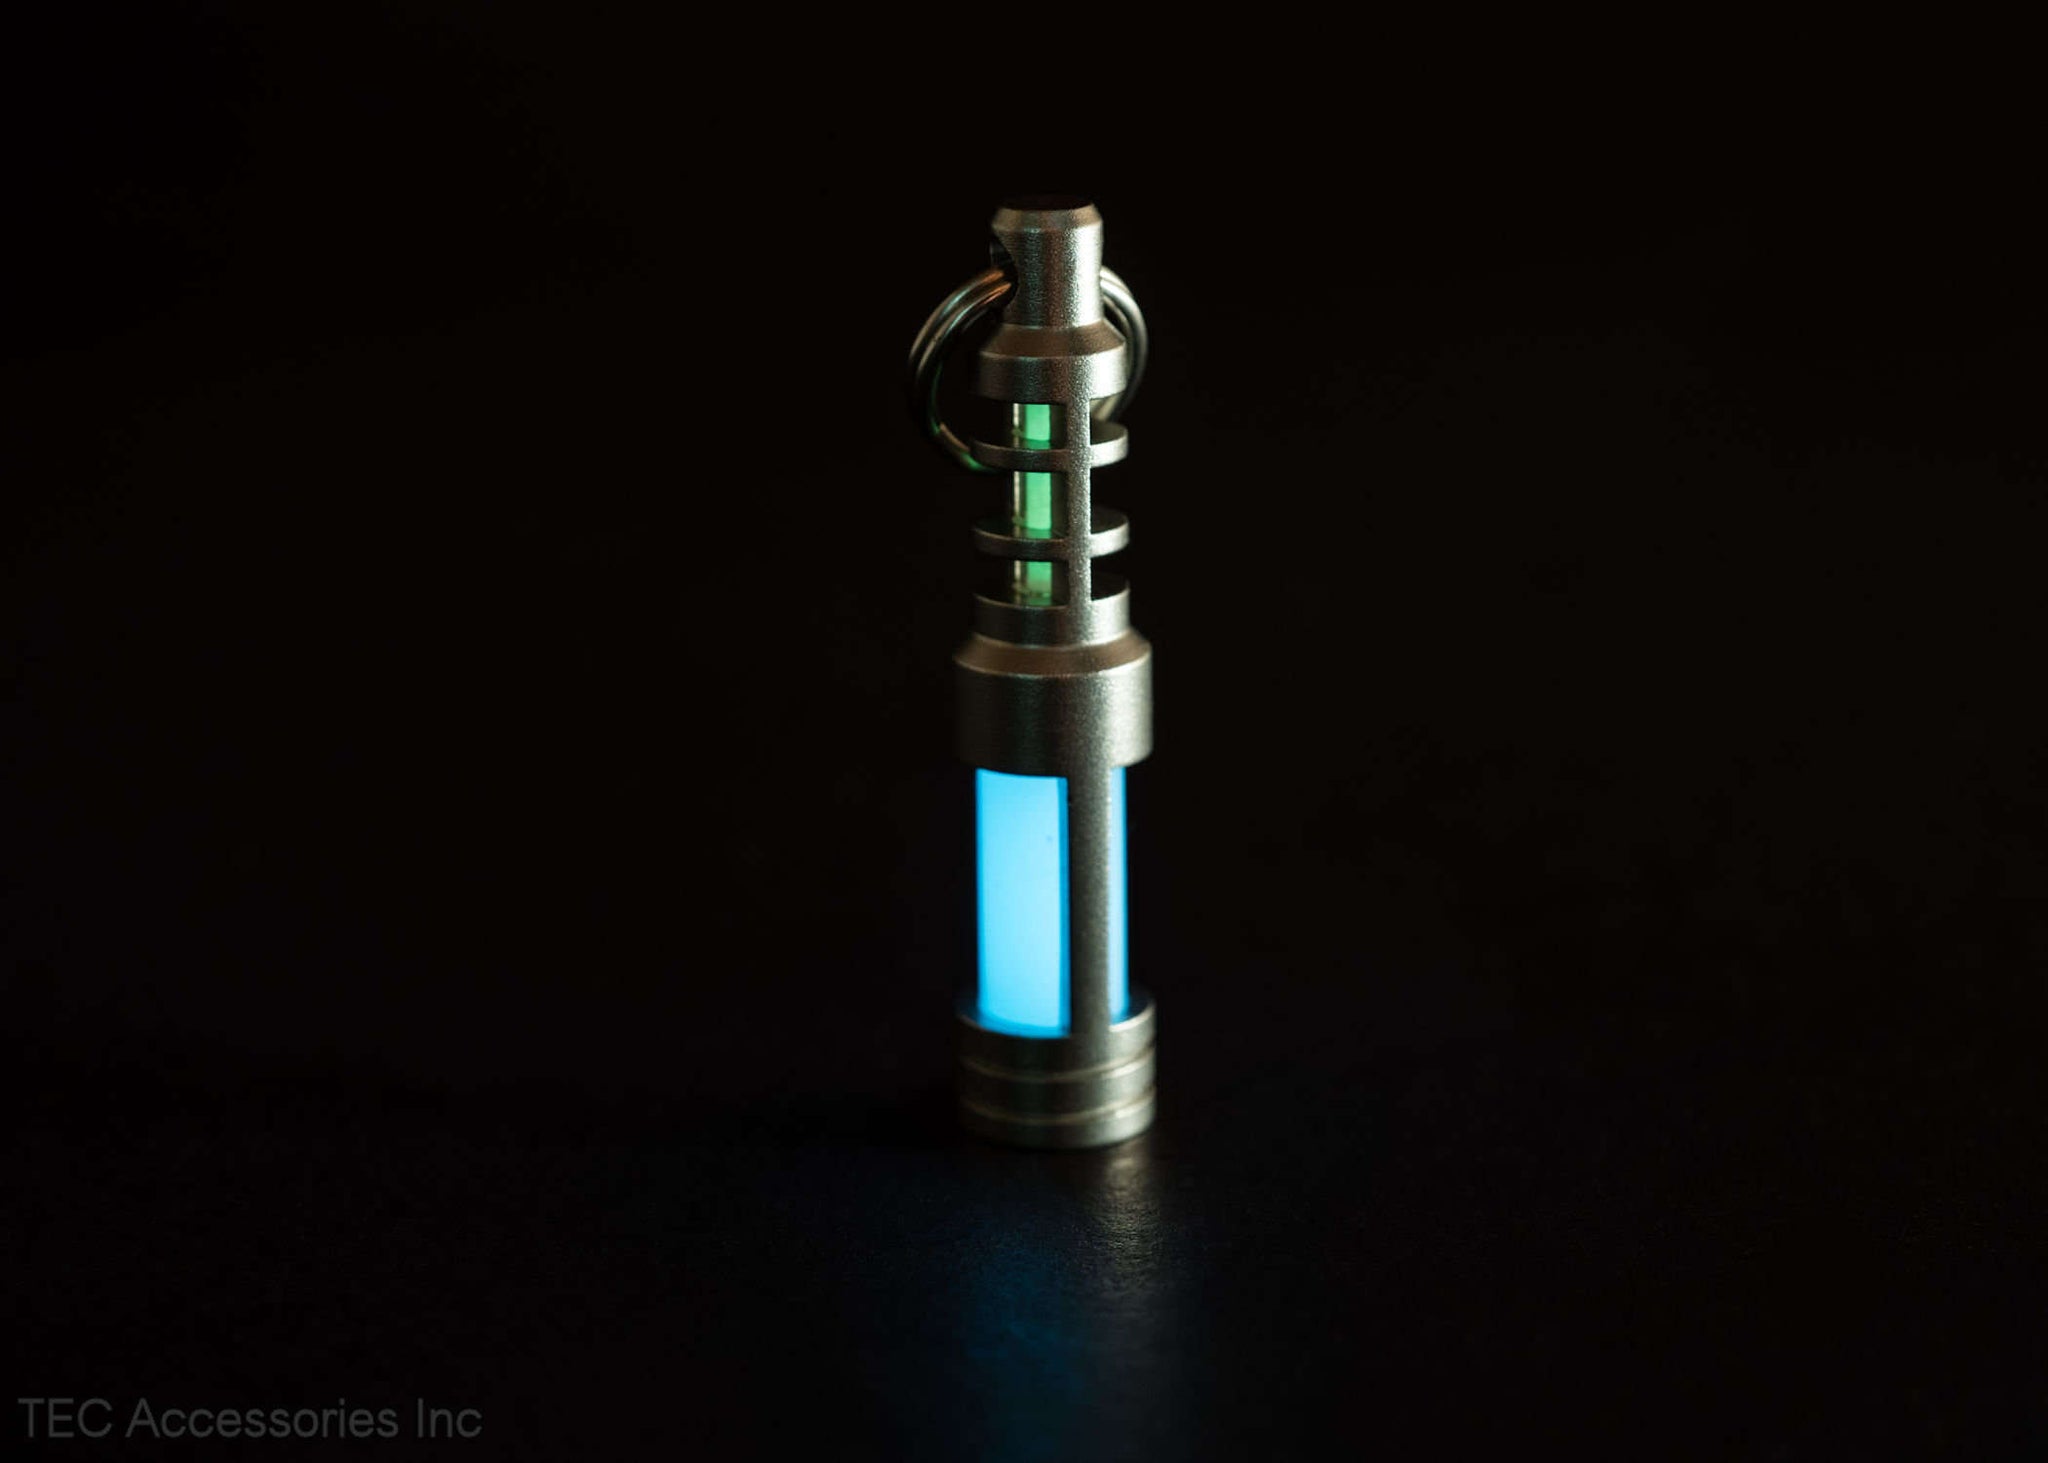 Isotope Chain Reaction Glow Fob at night